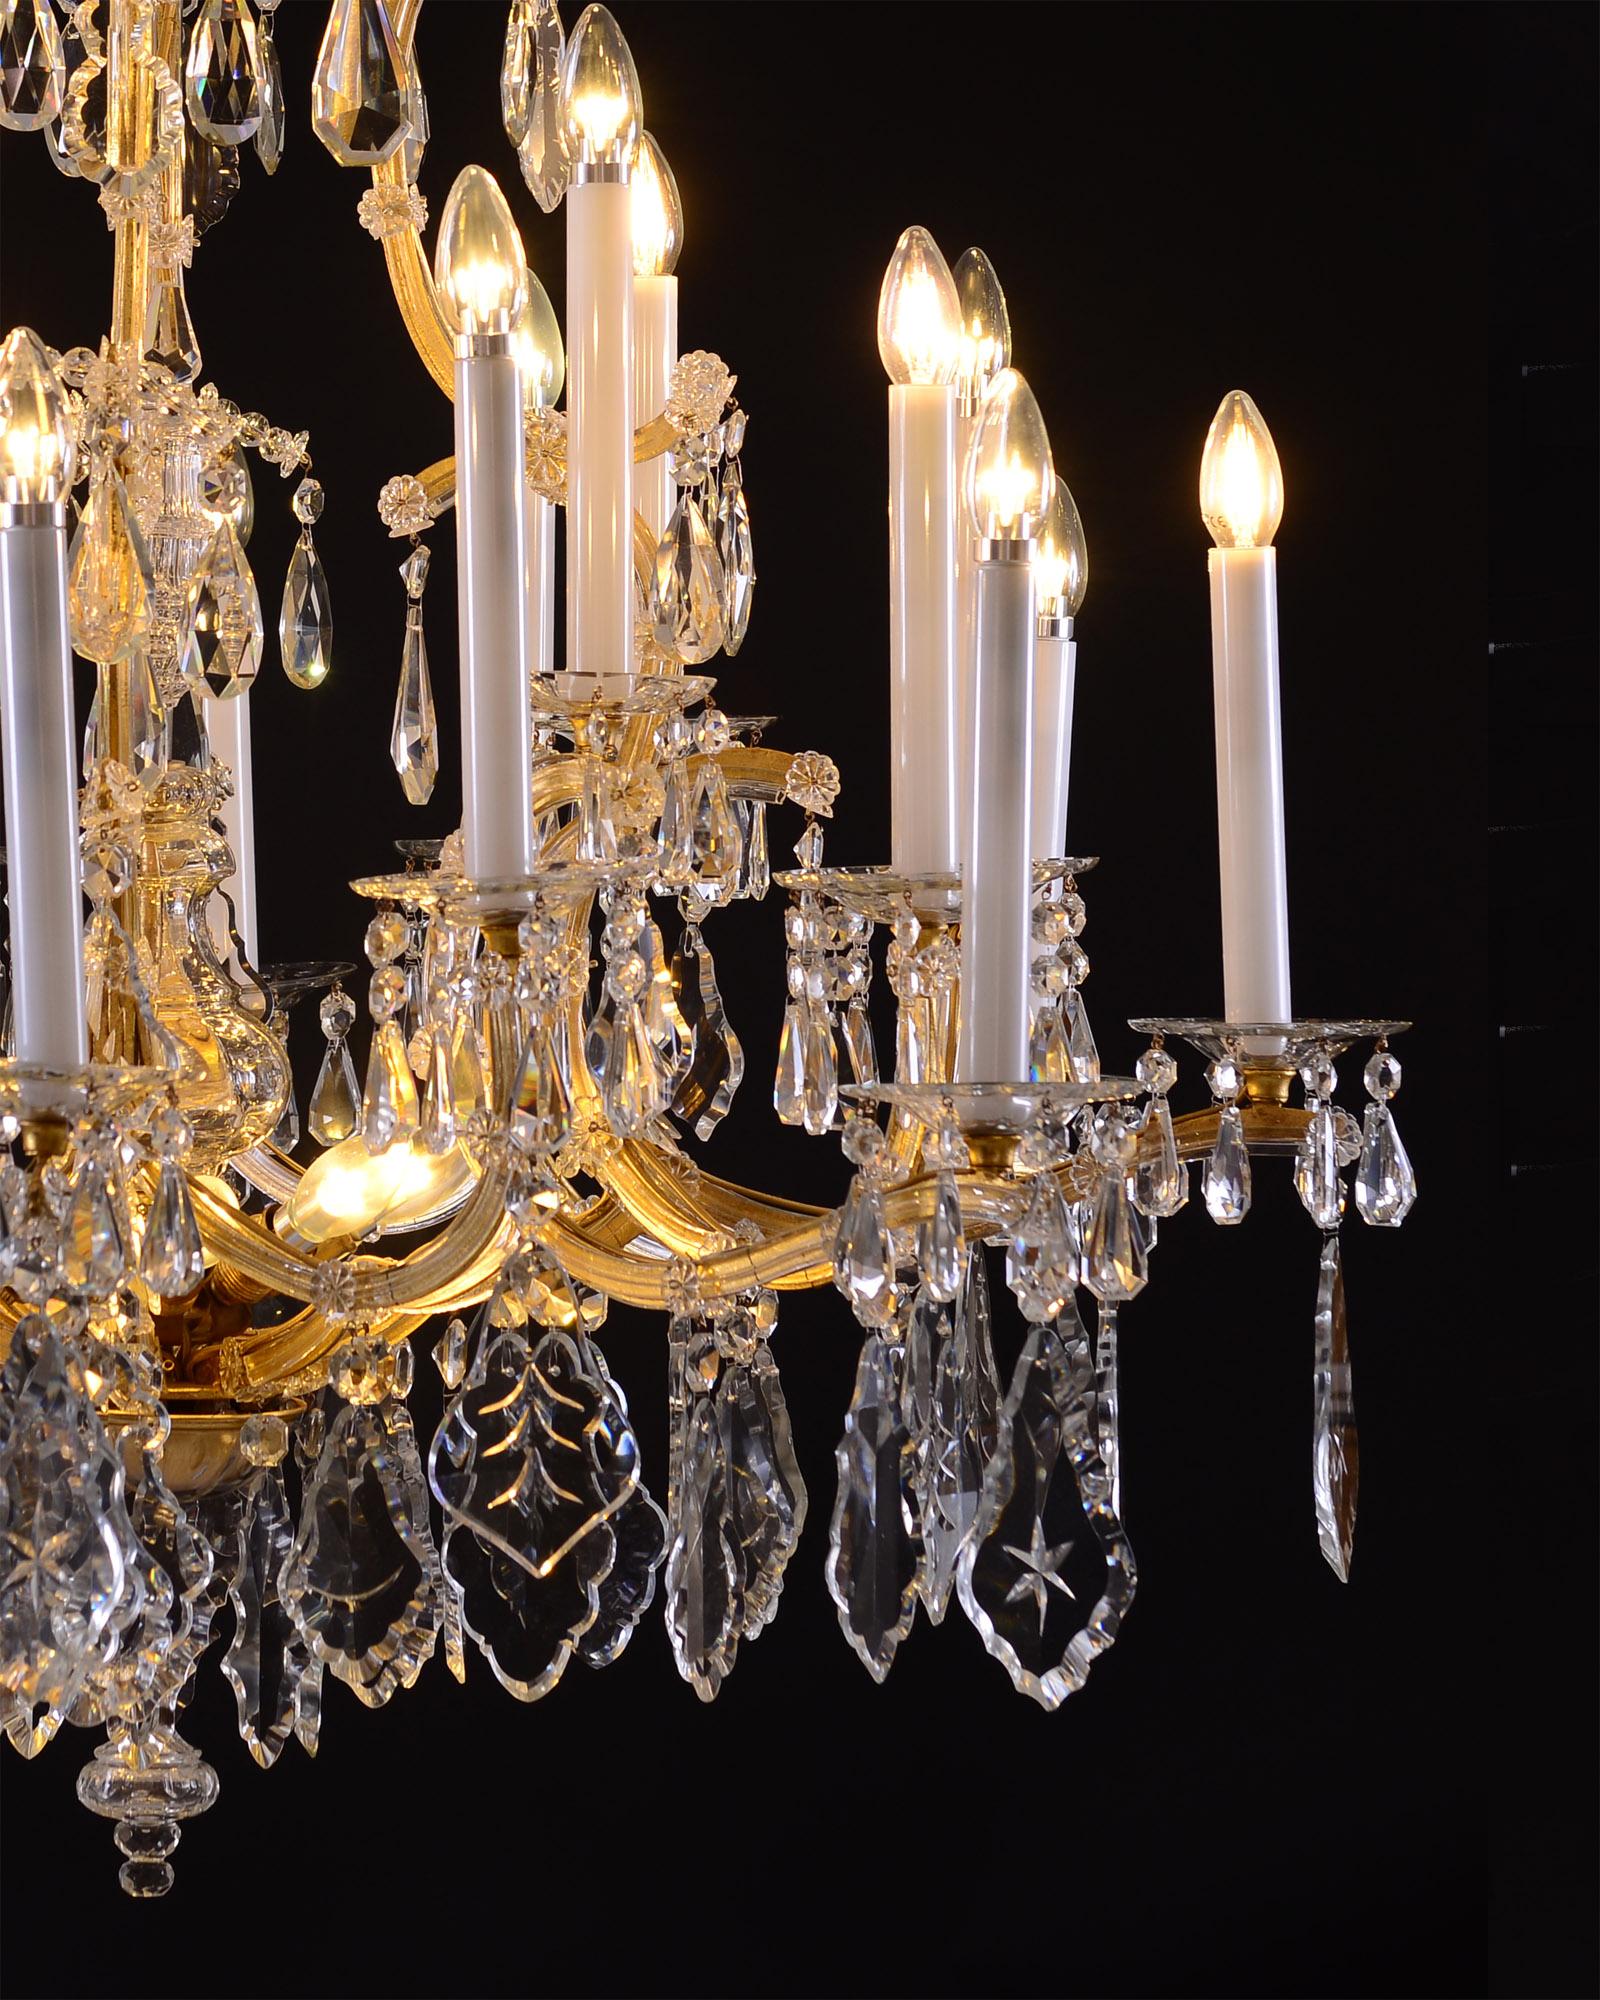 Hand-Crafted Original Lobmeyr Maria Theresien Crystal Chandelier, Richly Decorated 28 Lights For Sale